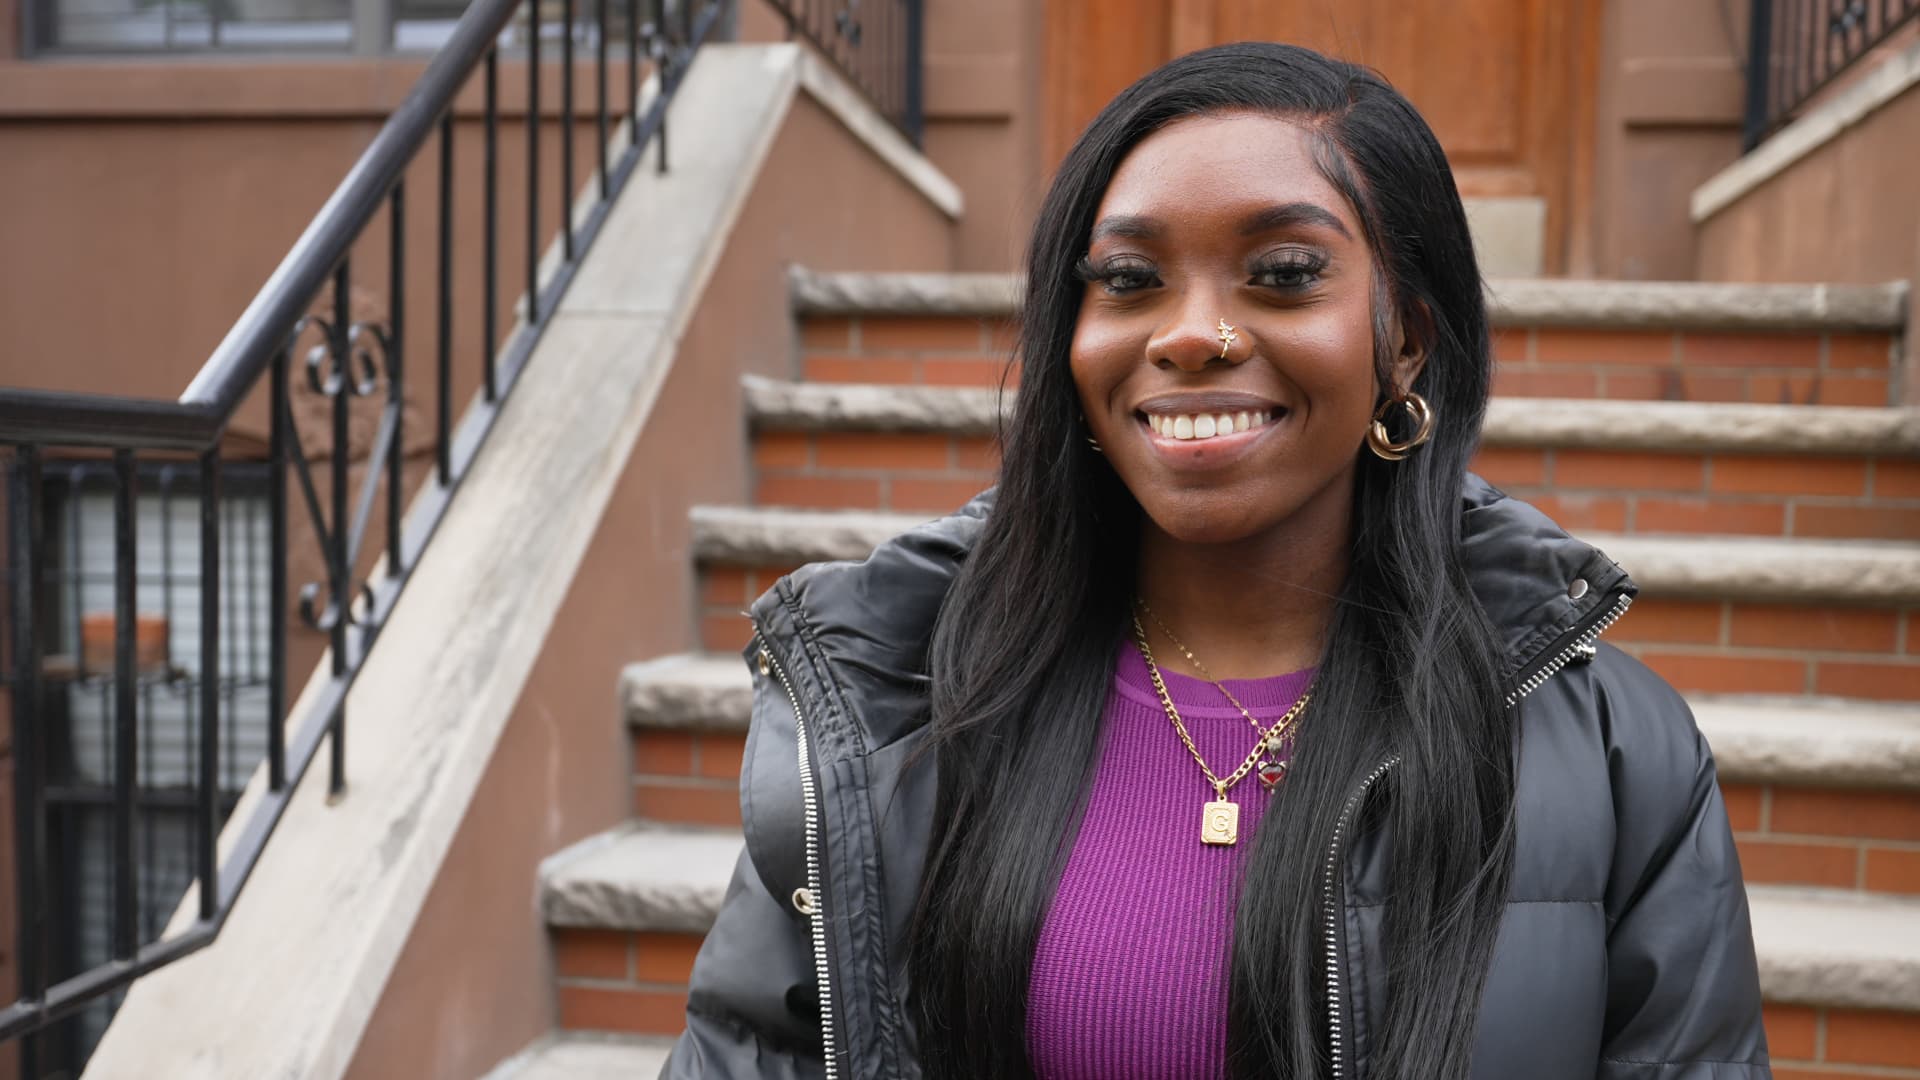 This 22-year-old won $2 million in scholarships, graduated from Princeton and lives debt-free in NYC